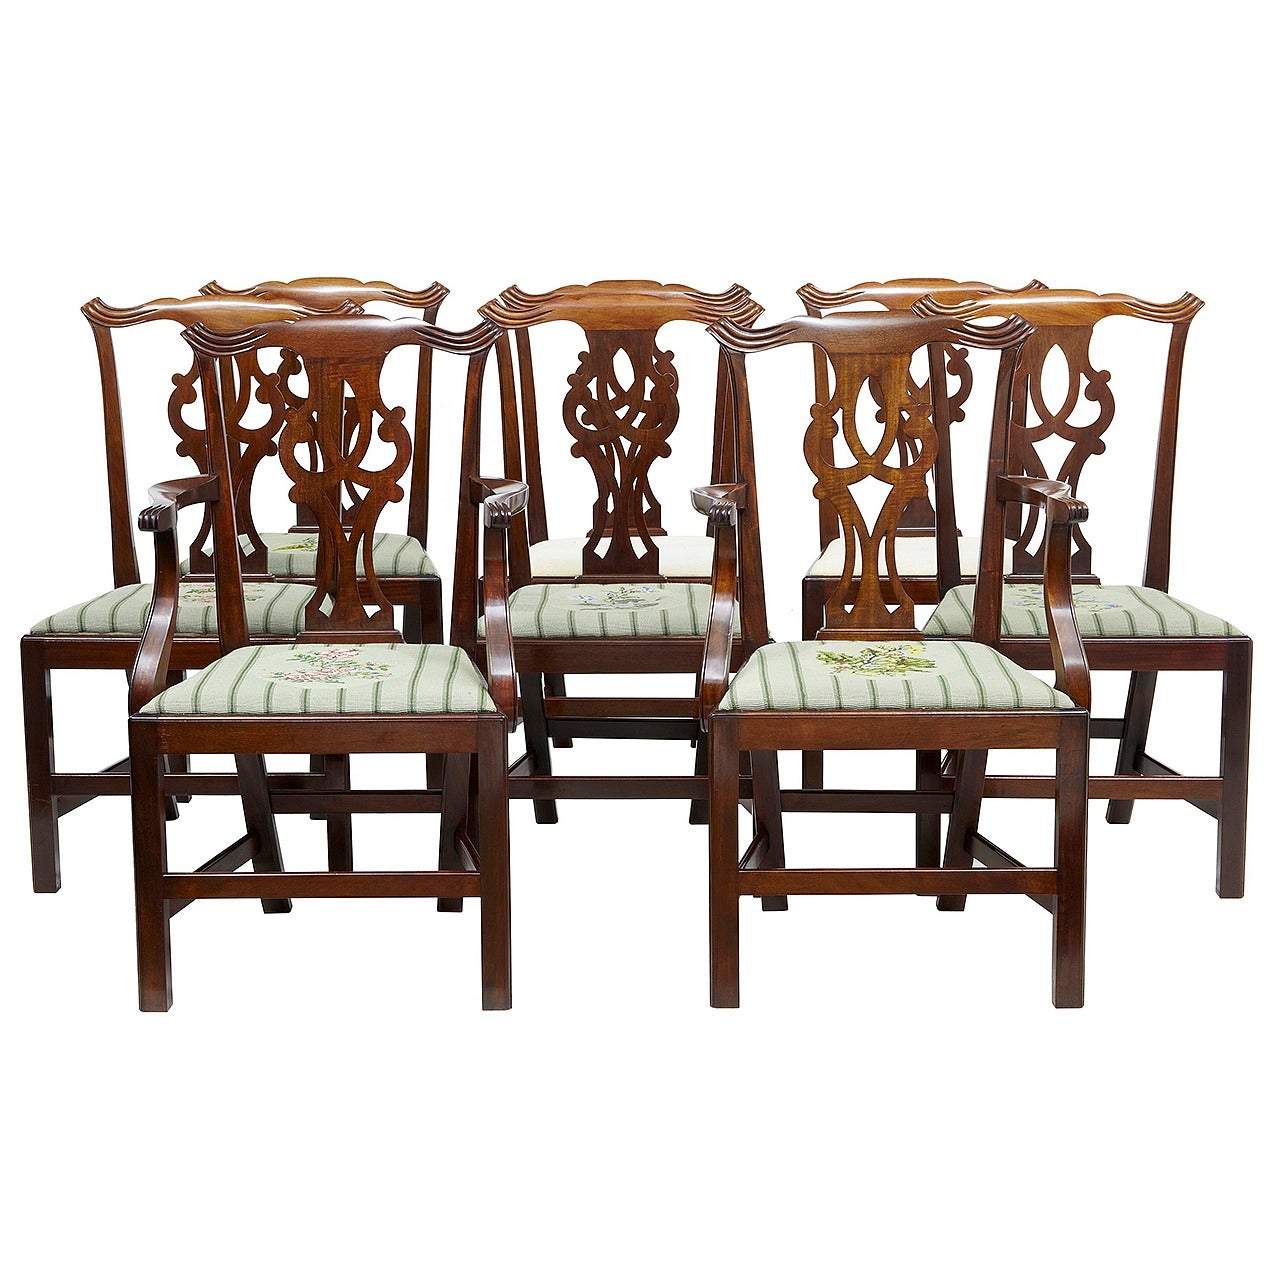 Set of Eight 19th Century Chippendale Inspired Mahogany Dining Chairs